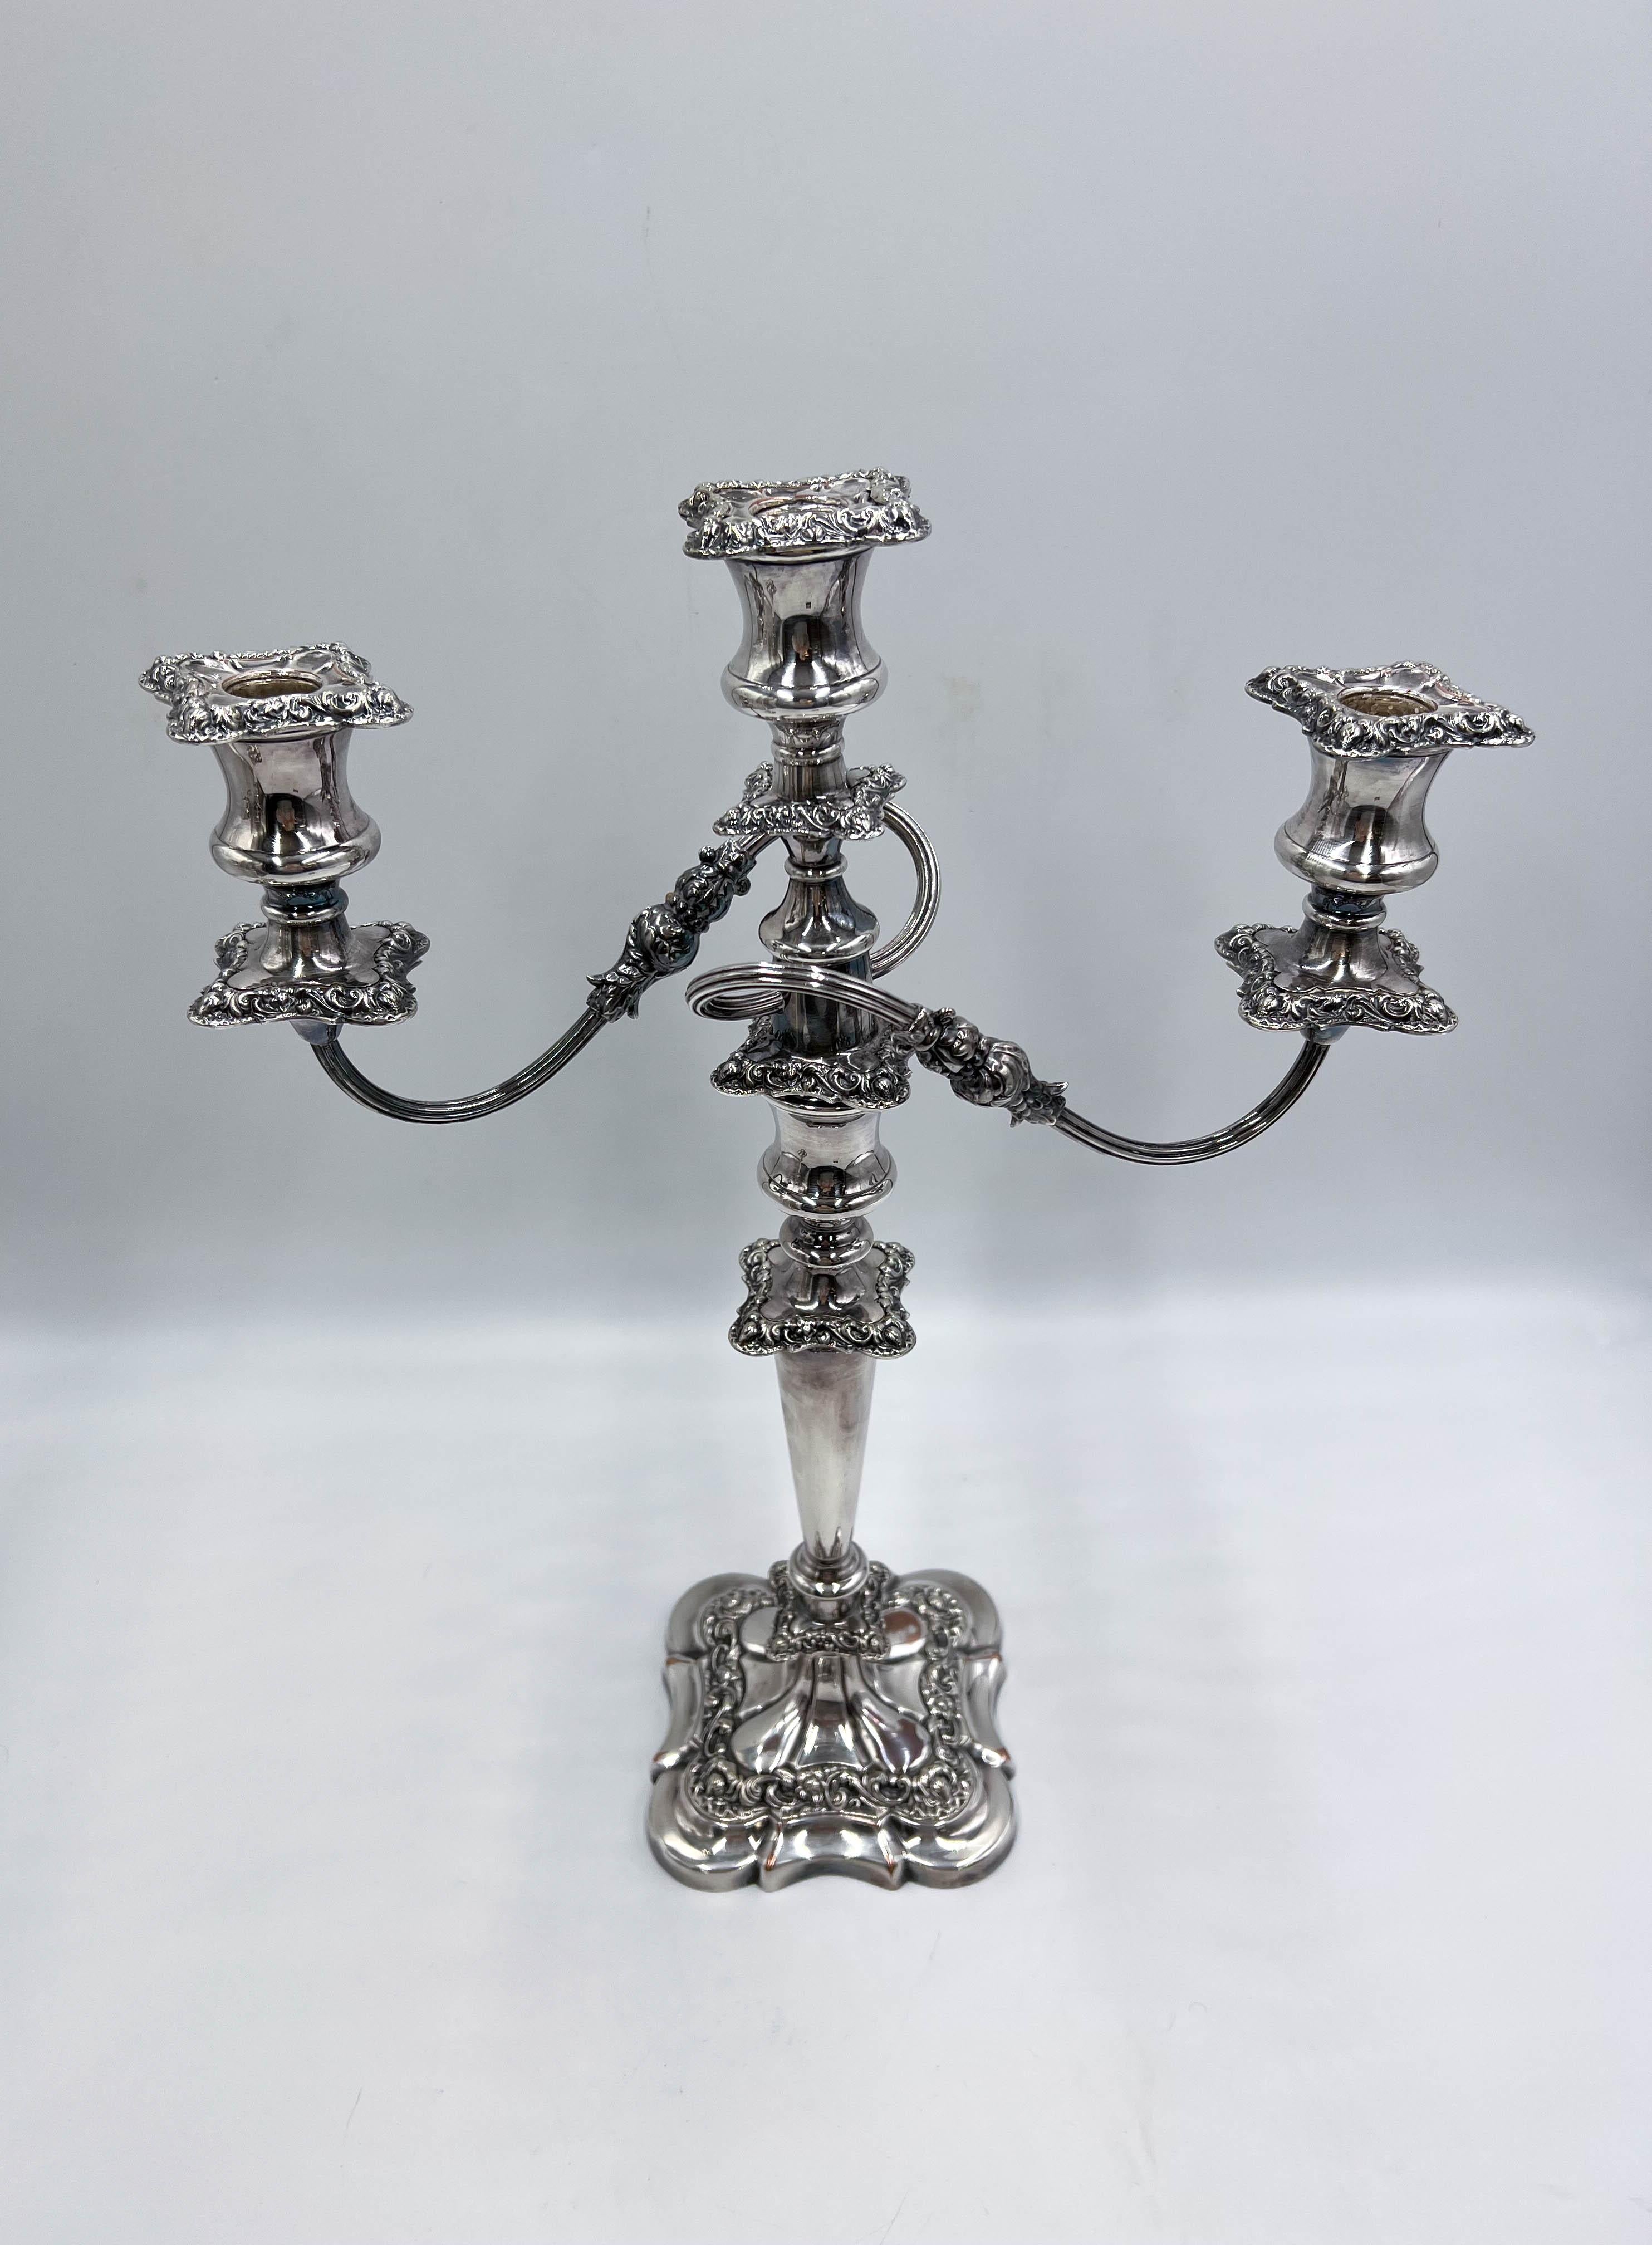 Pair of 1920s William Suckling Ltd English Silver Plate Candelabras/Candlesticks For Sale 7